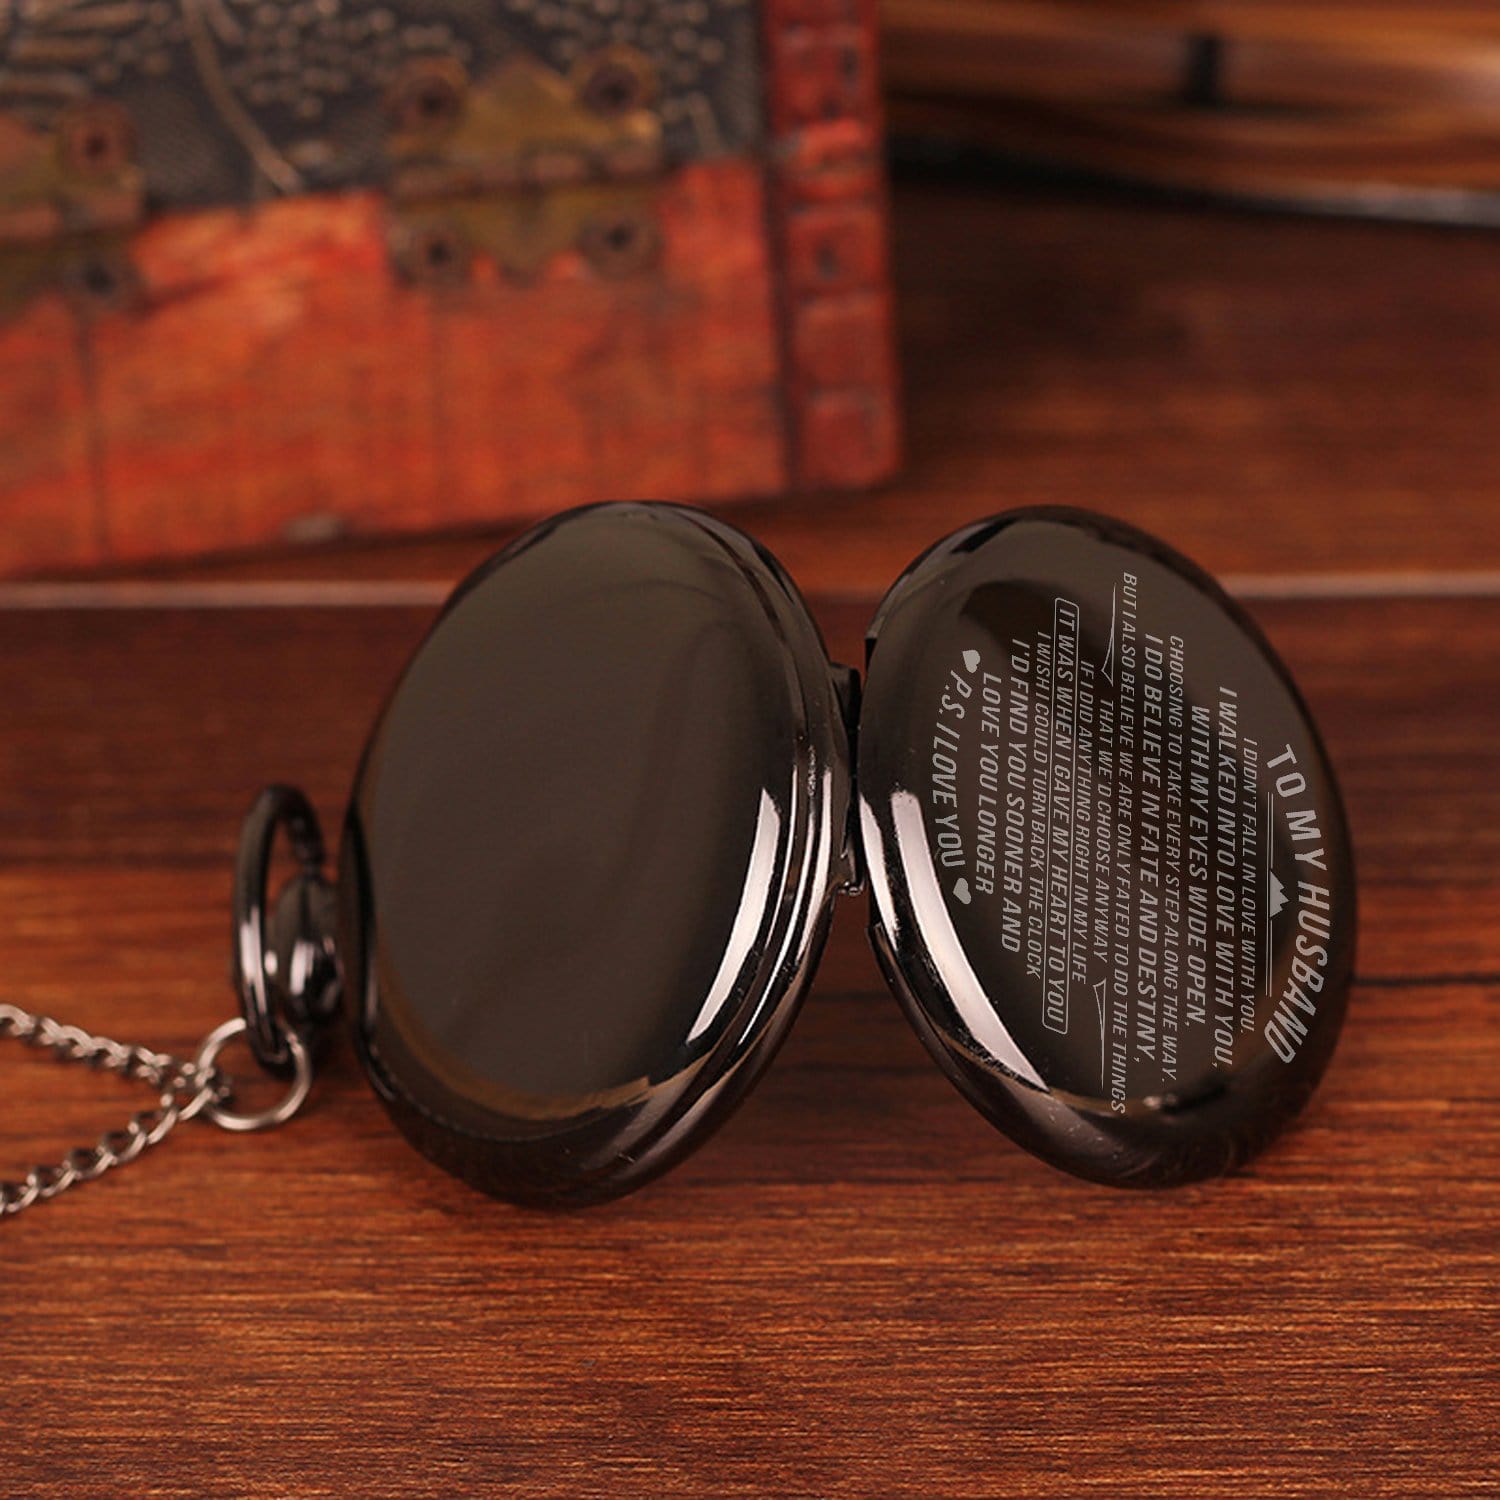 Pocket Watches To My Husband - I Do Believe In Fate And Destiny Pocket Watch GiveMe-Gifts